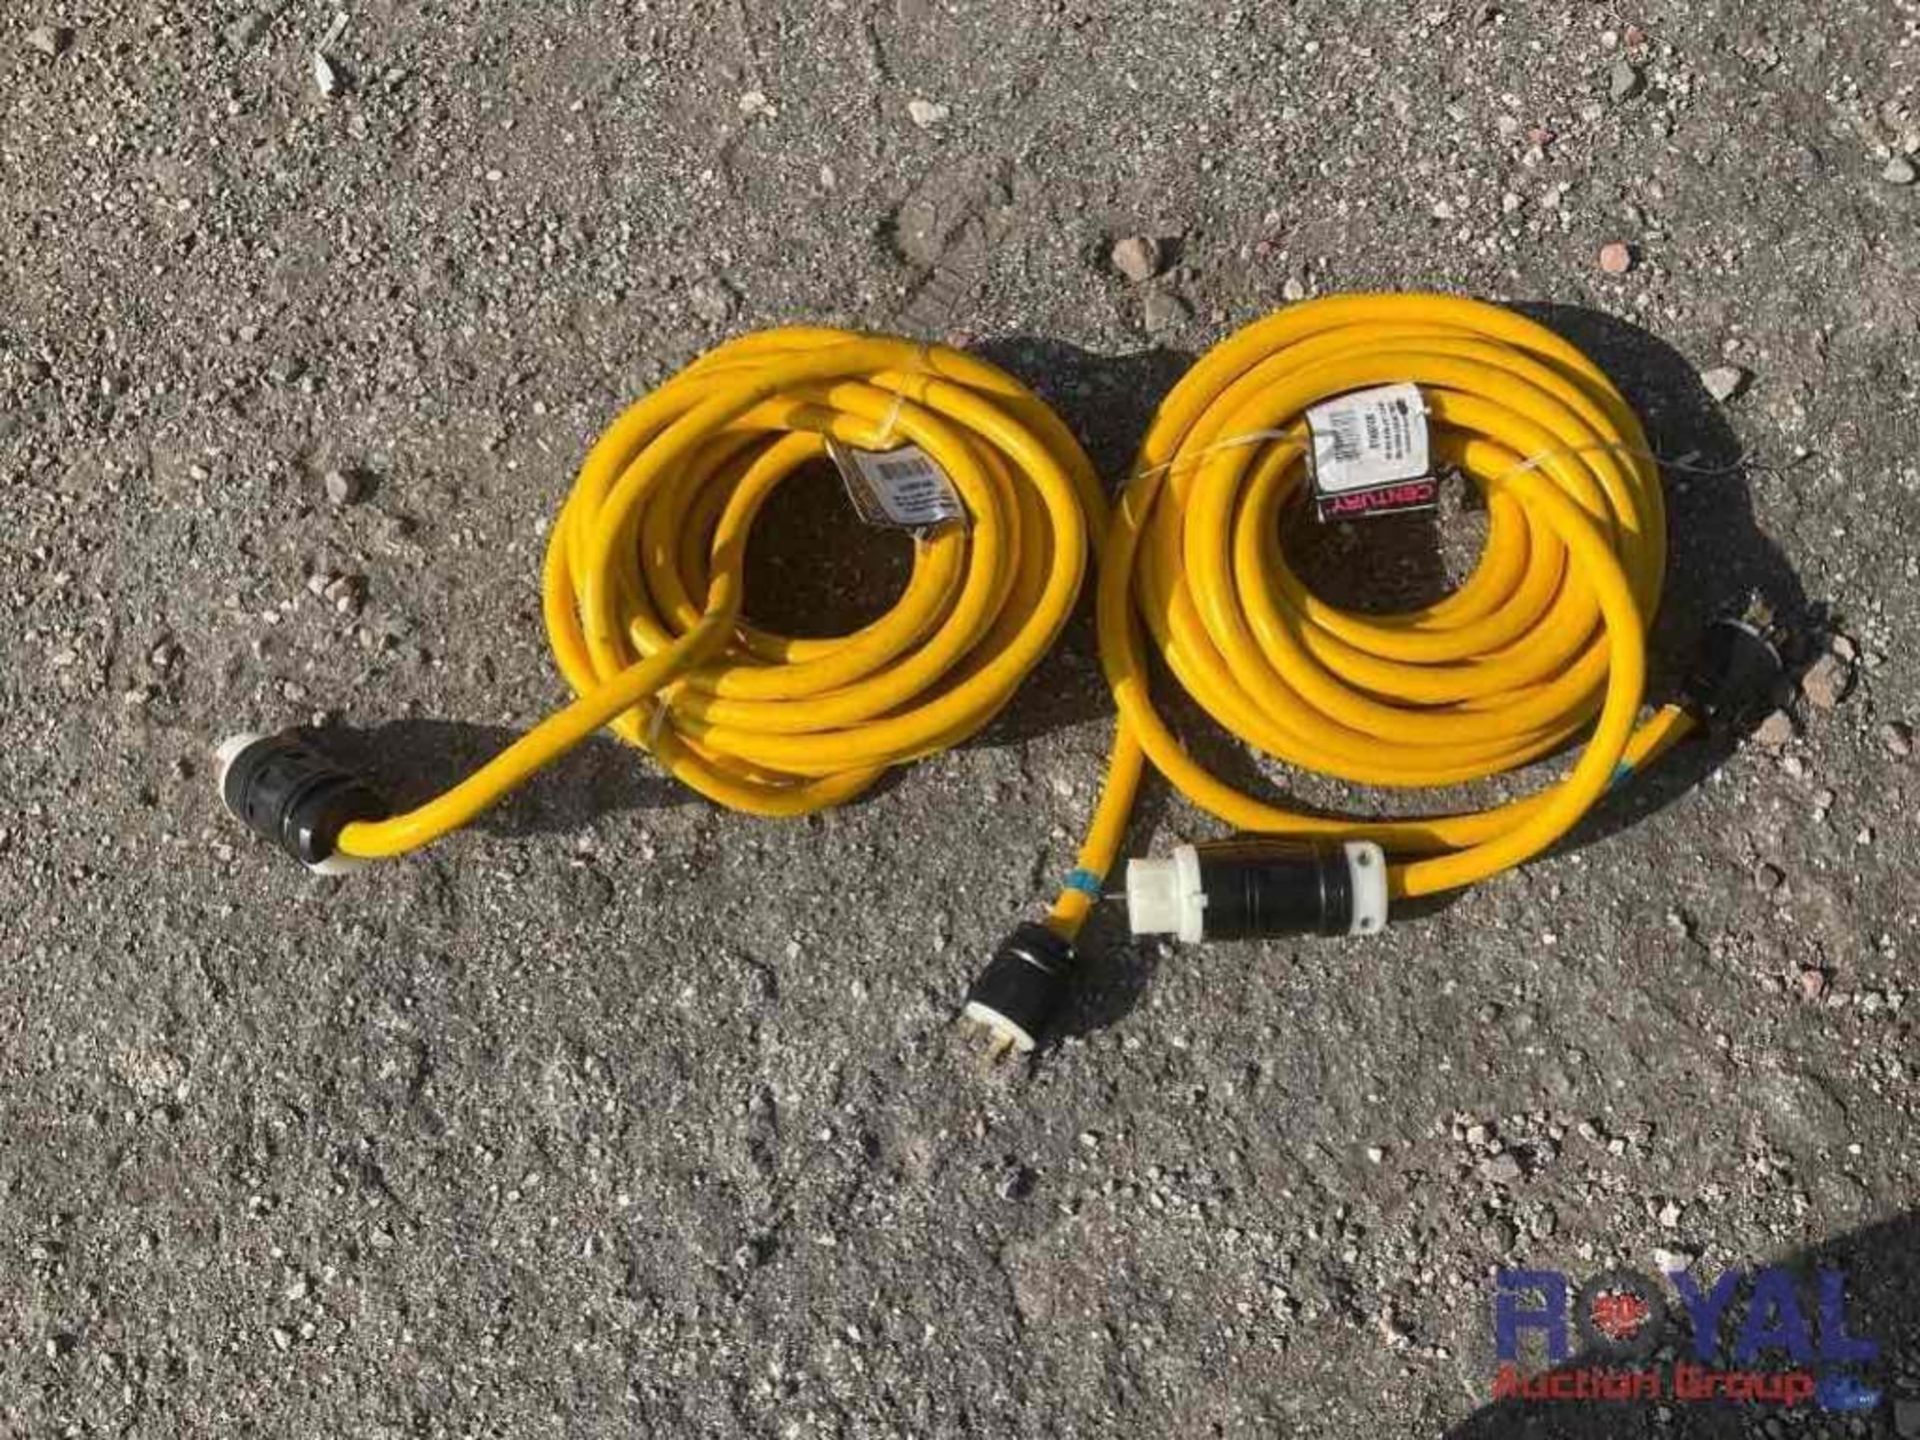 2-Century Wire Power Cords, Yellow, 50 Ft 8/4 Cable - Image 3 of 7